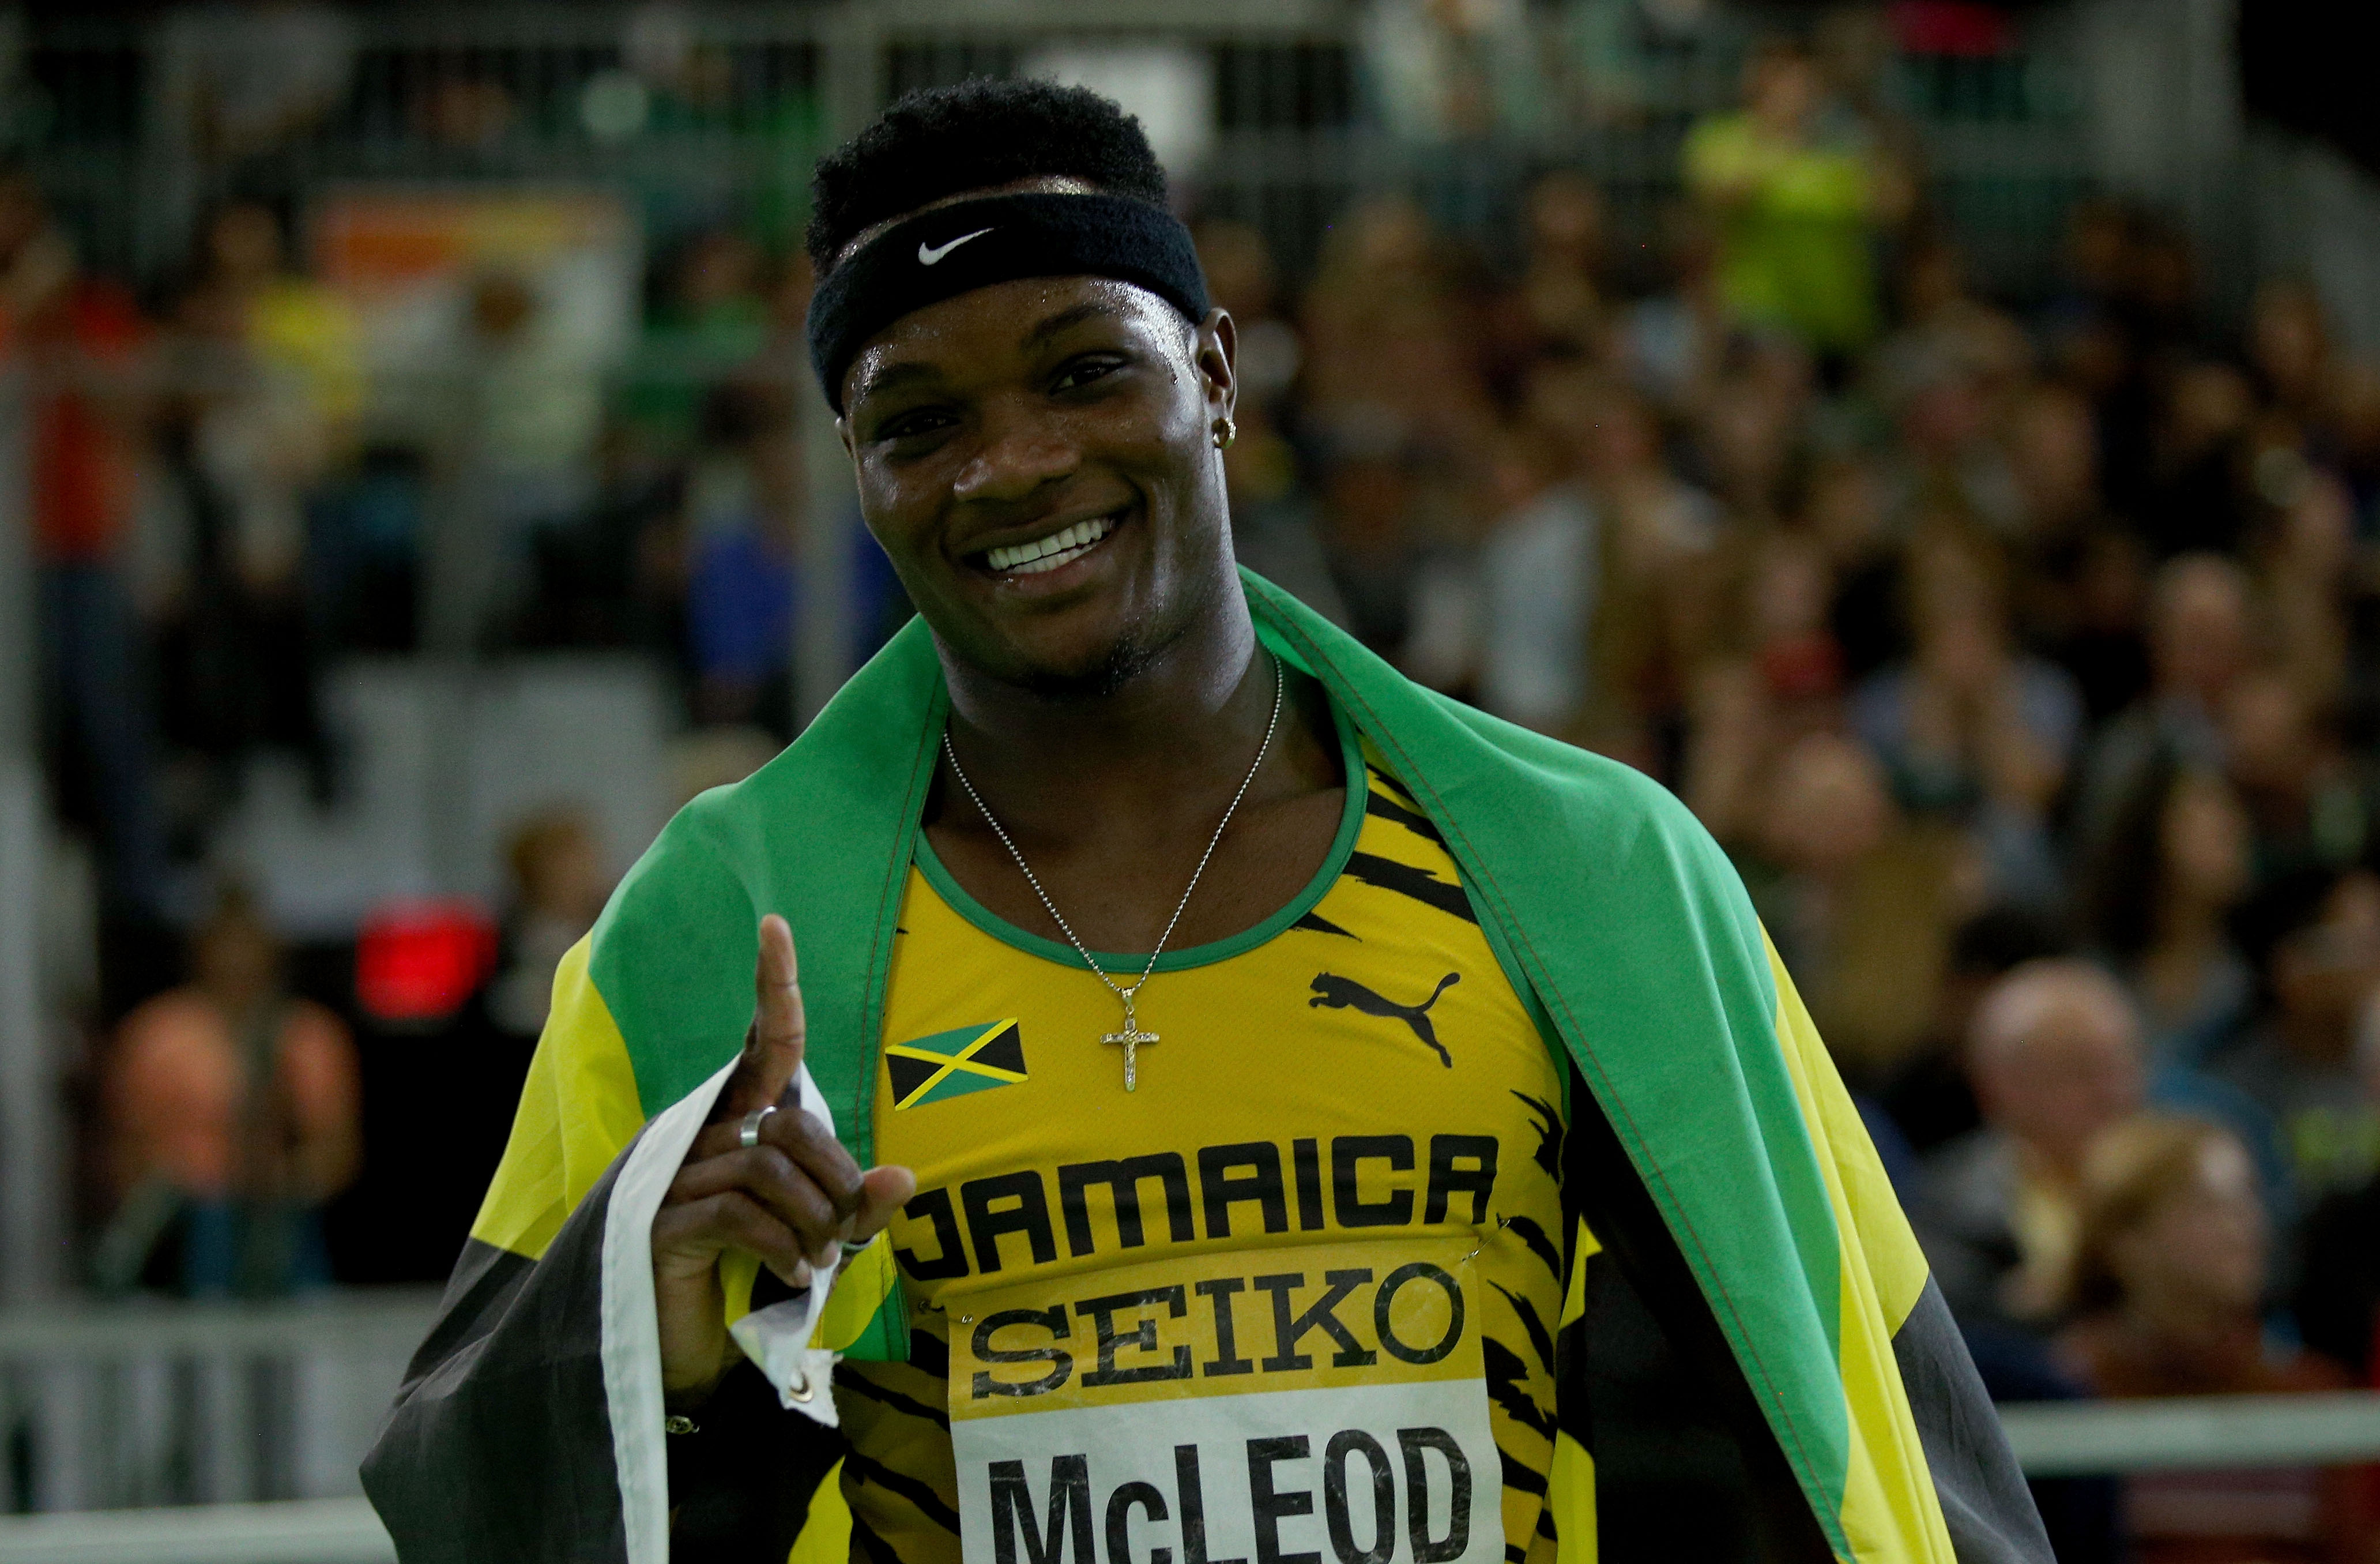 New Podcast: Omar McLeod aiming to become legendary